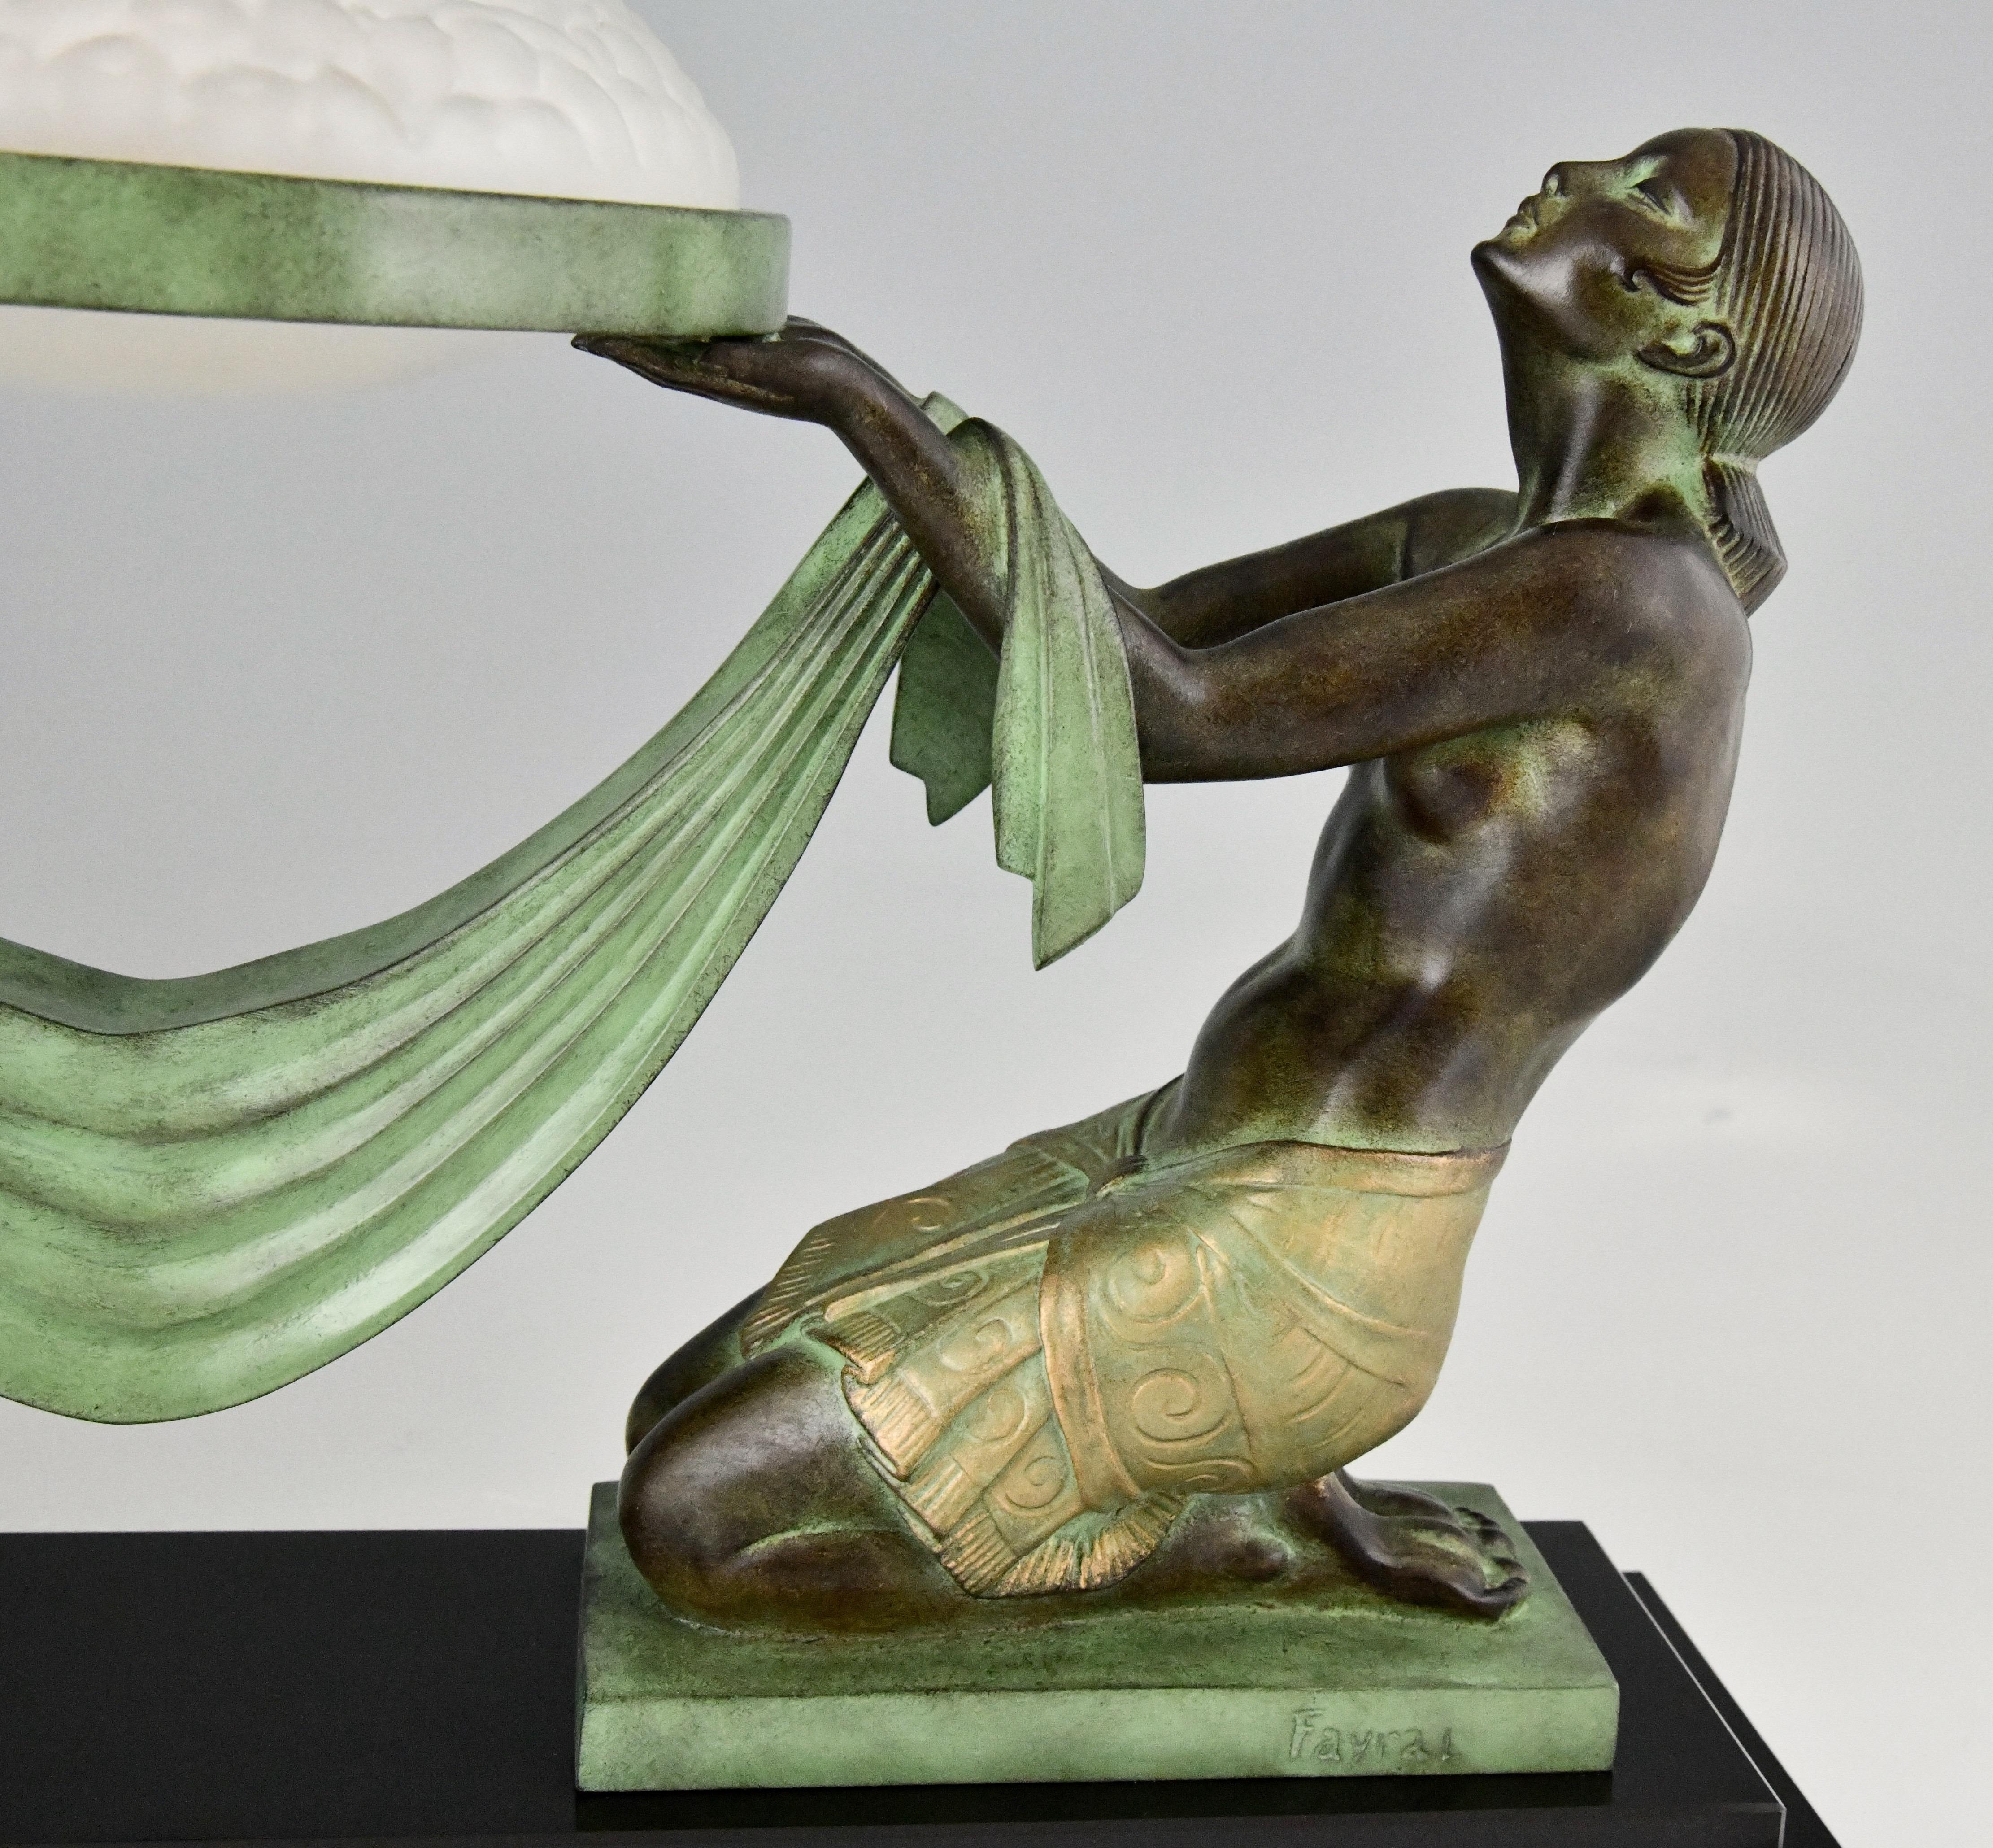 Art Deco Style Table Lamp with Two Kneeling Nudes by Fayral for Max Le Verrier 2